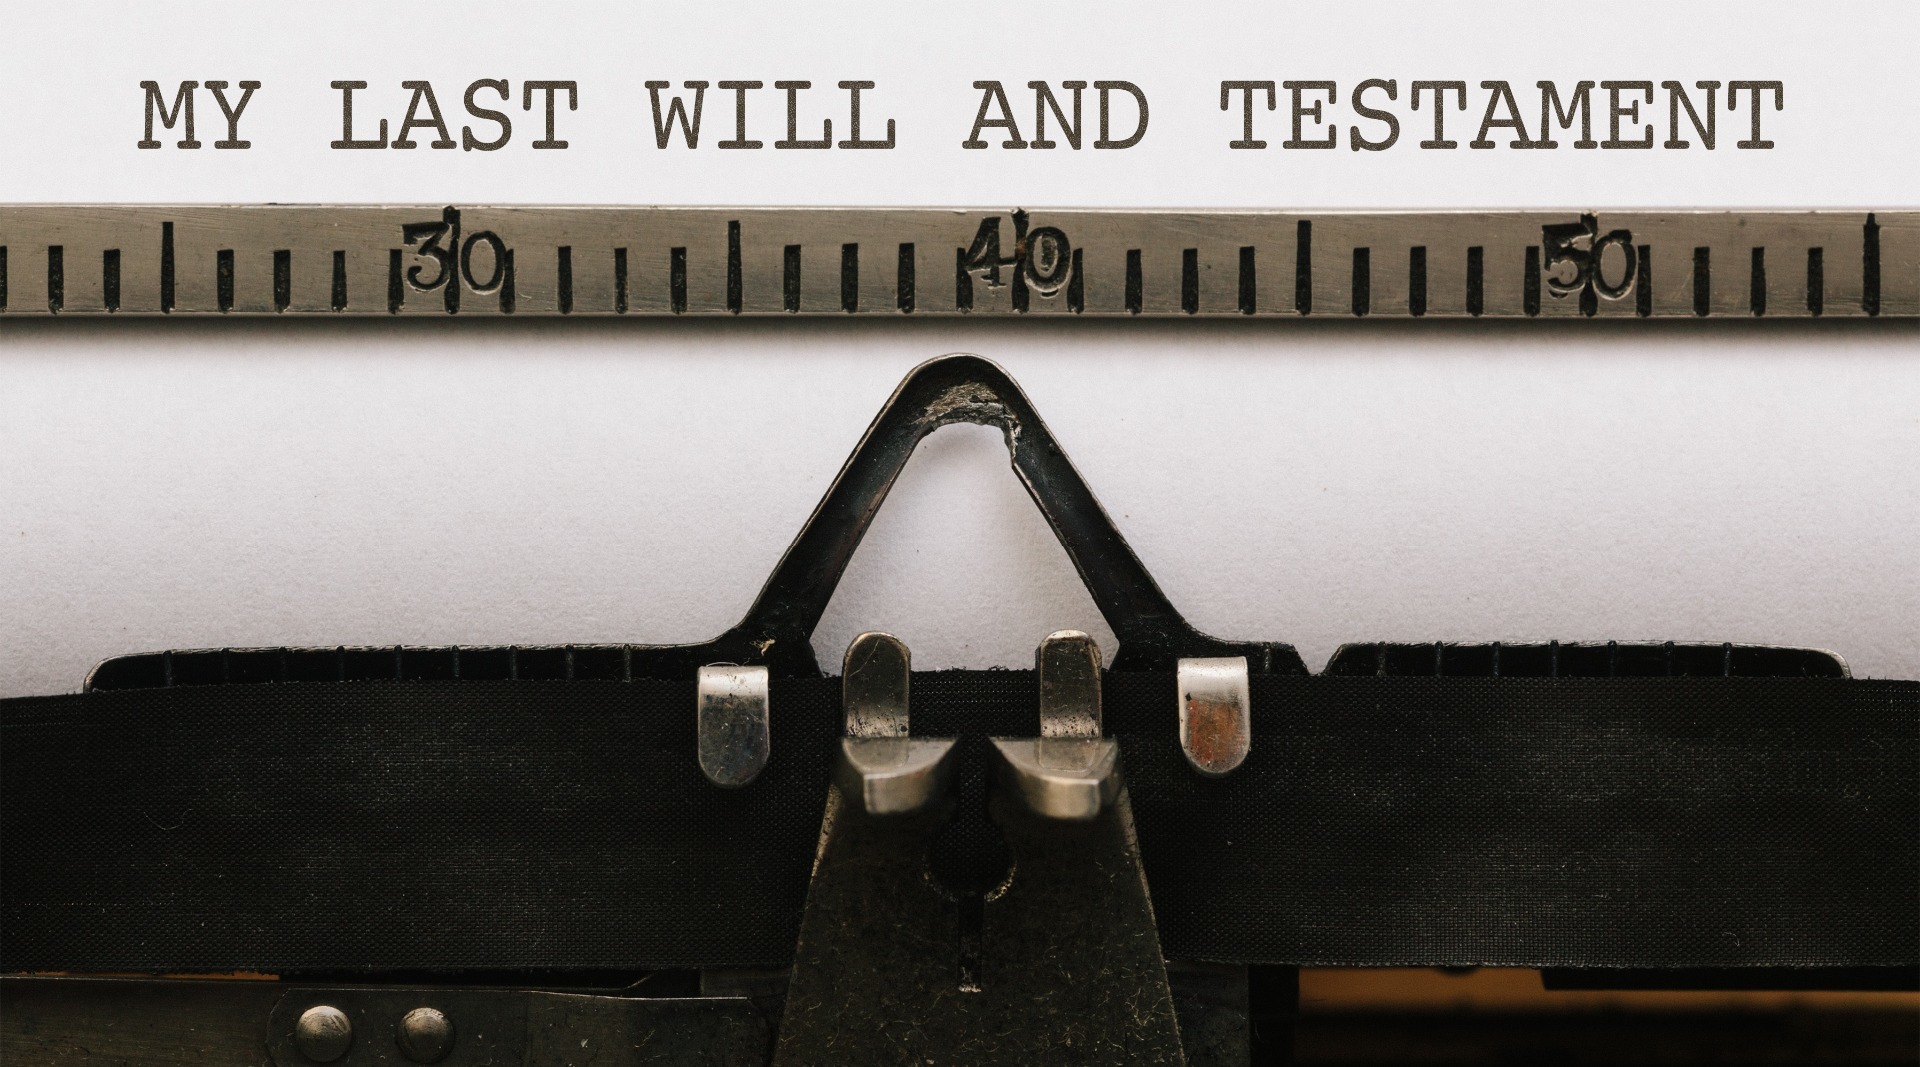 'My Last Will and Testament' written on a type-writer machine.